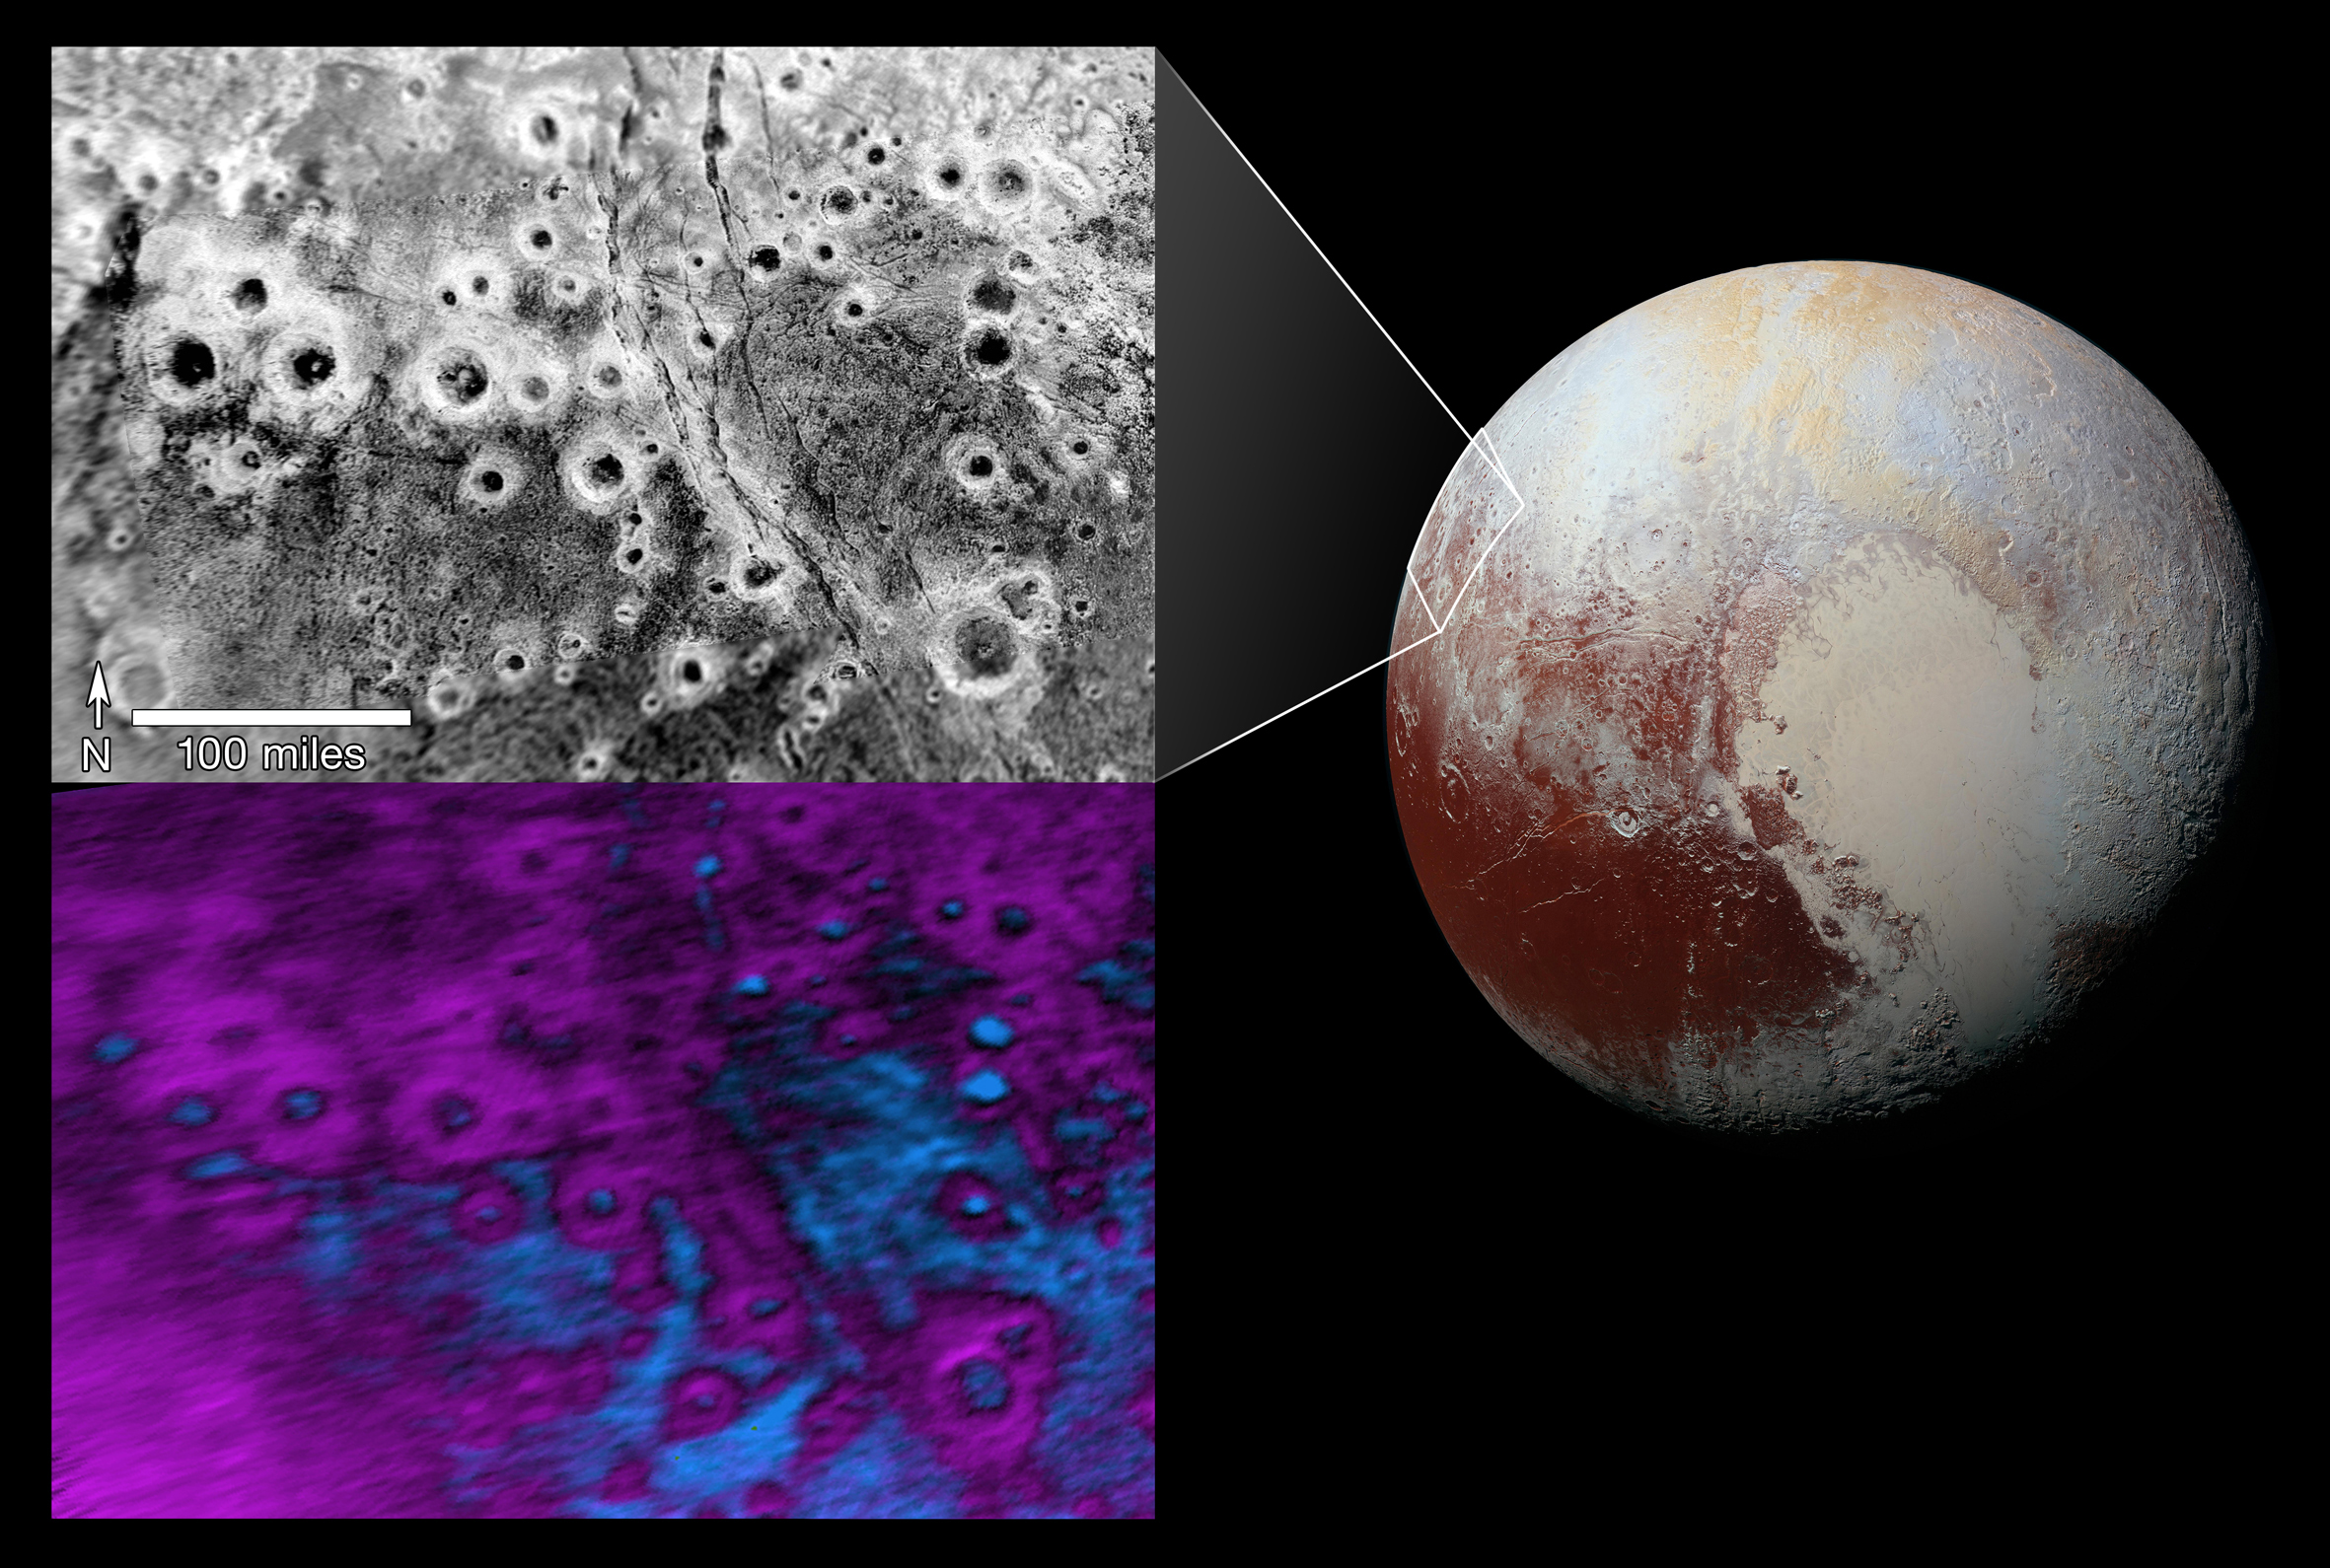 Figure 12: Halo Craters and methane distribution on Pluto. In the upper image, shown in visible light, the craters’ bright rims stand out sharply from their dark floors and the surrounding terrain. In the lower image, created from composition data gathered by the Ralph/Linear Etalon Imaging Spectral Array (LEISA), there seems to be a correlation between the bright halos and distribution of methane ice, shown in false colour as purple. The floors and terrain between coloured blue, show evidence of water ice. The largest crater here is 50 km across. Credit: NASA/JHUAPL/SwRI